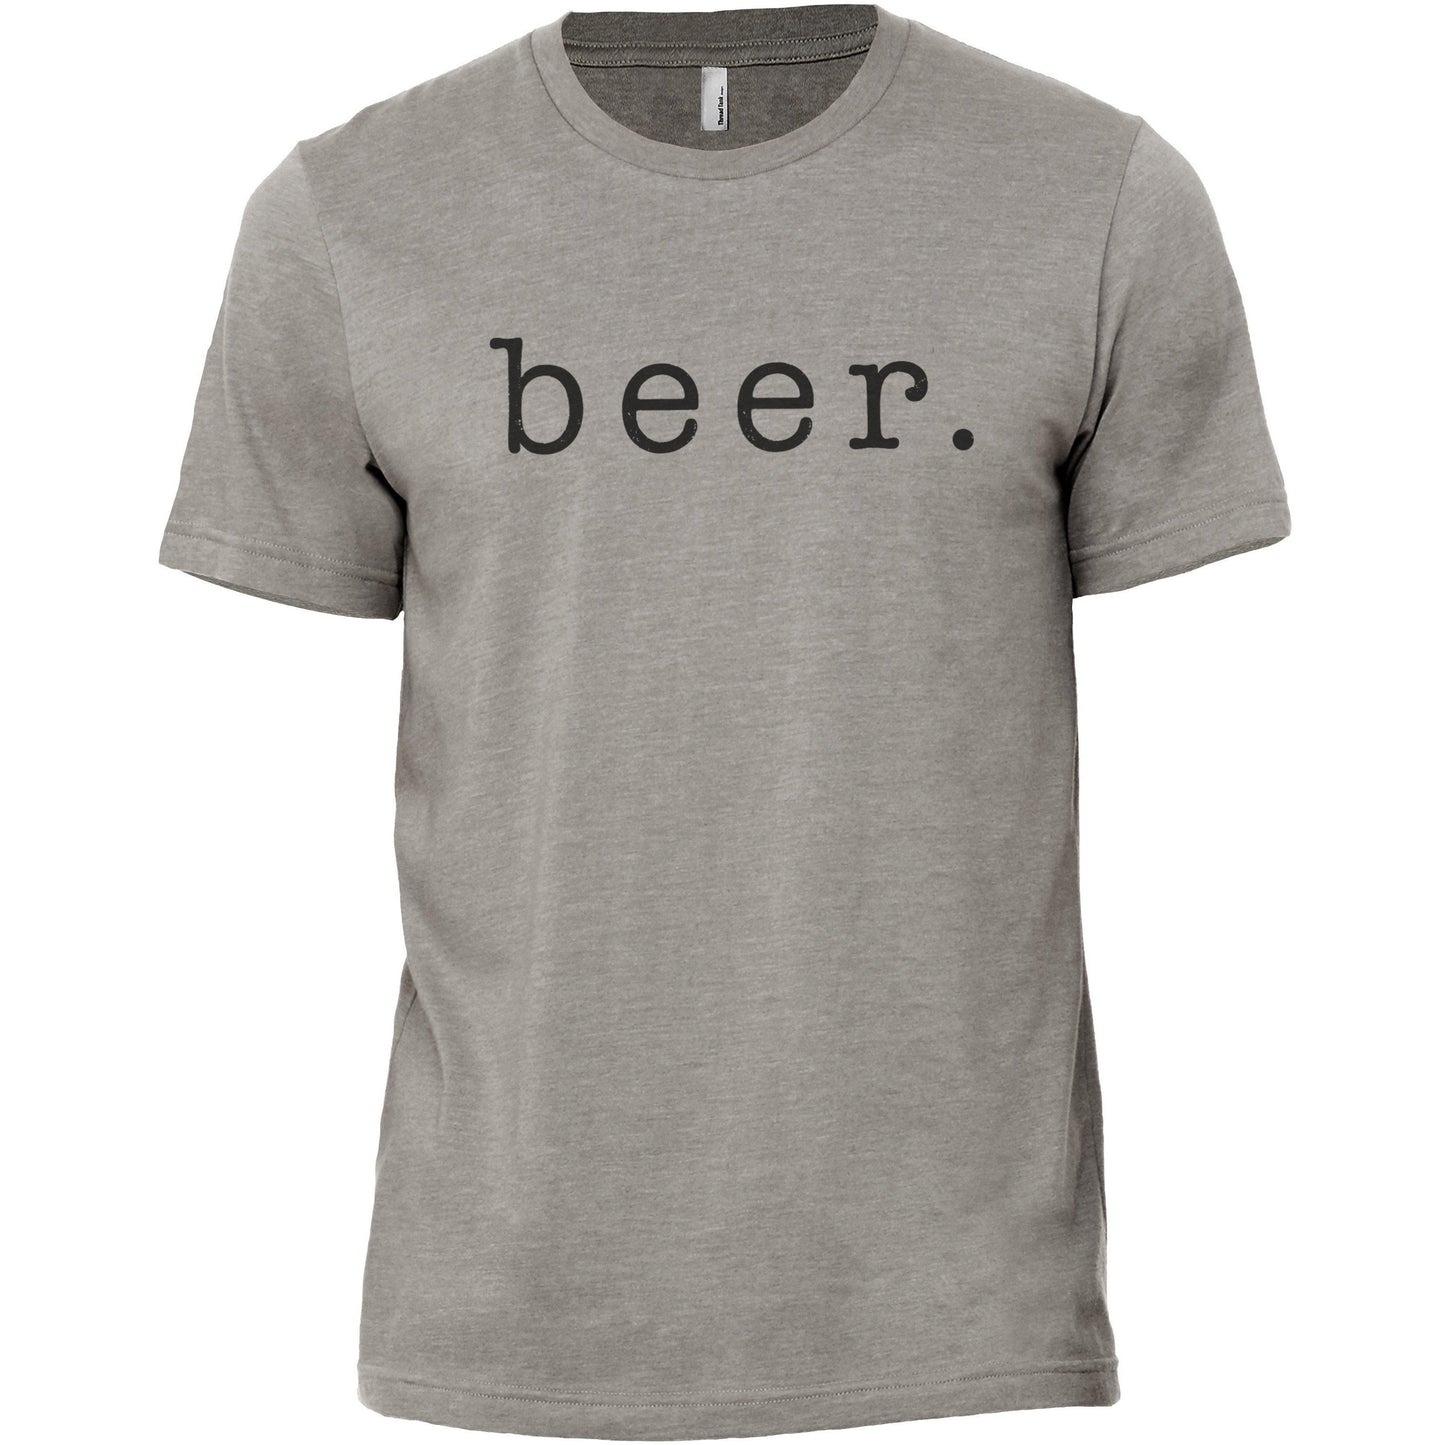 Beer - Stories You Can Wear